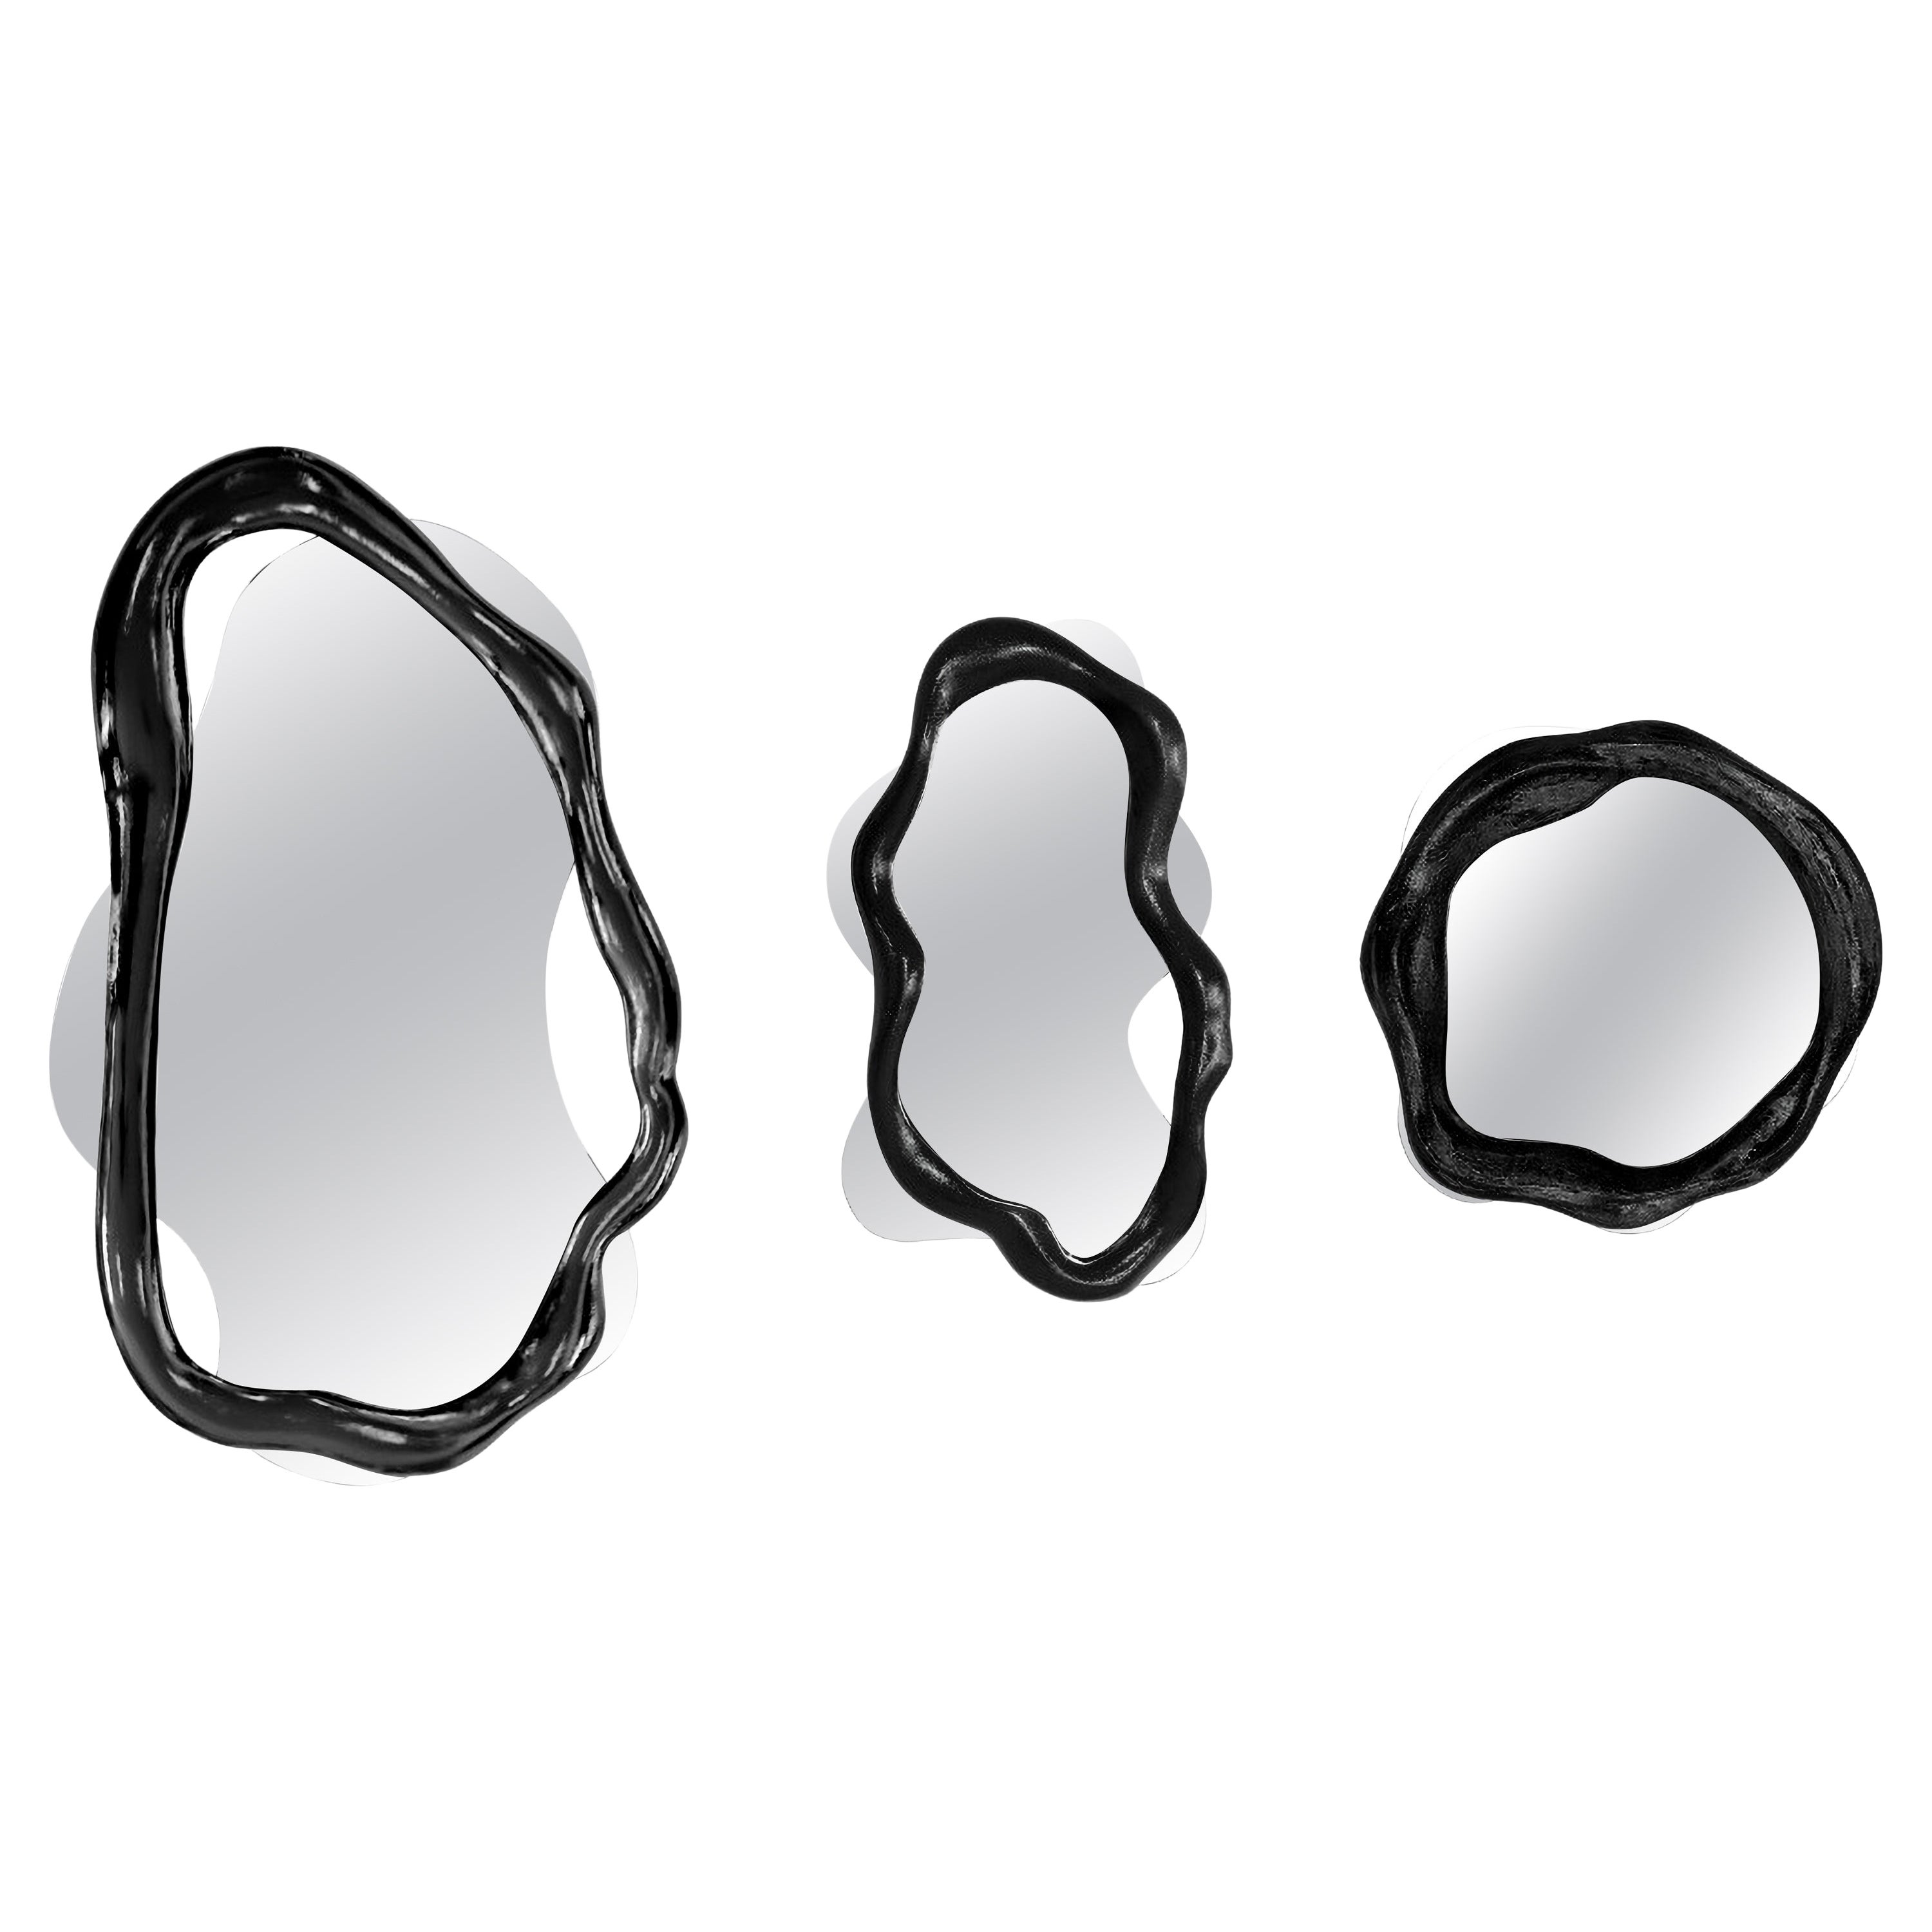 New Set of 3 Mirrors in Resin and Fiberglass Lacquered For Sale